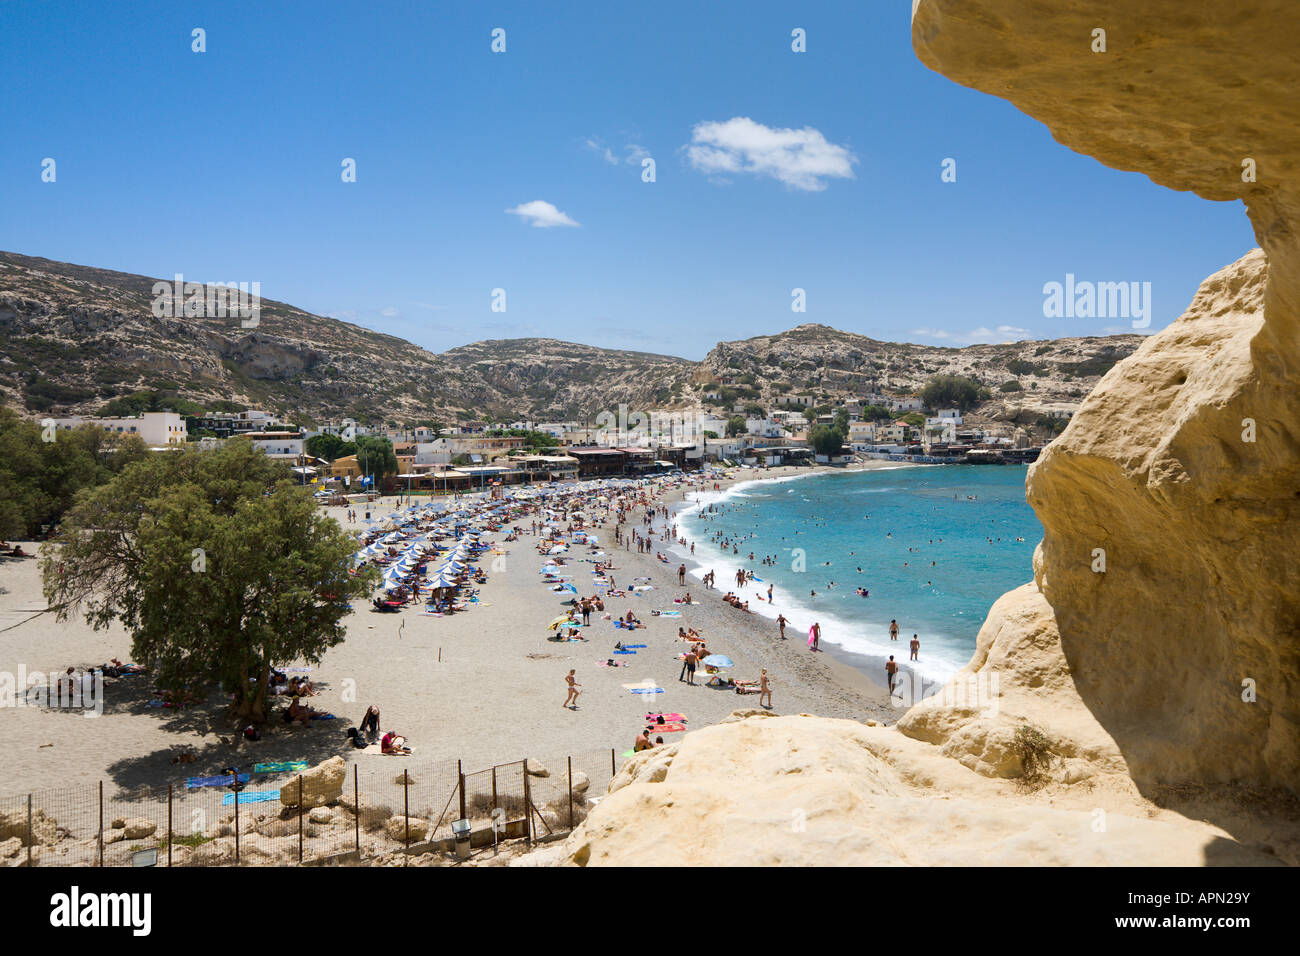 View over the beach and village from the cliff and caves, Matala, South Coast, Iraklion Province, Crete, Greece Stock Photo